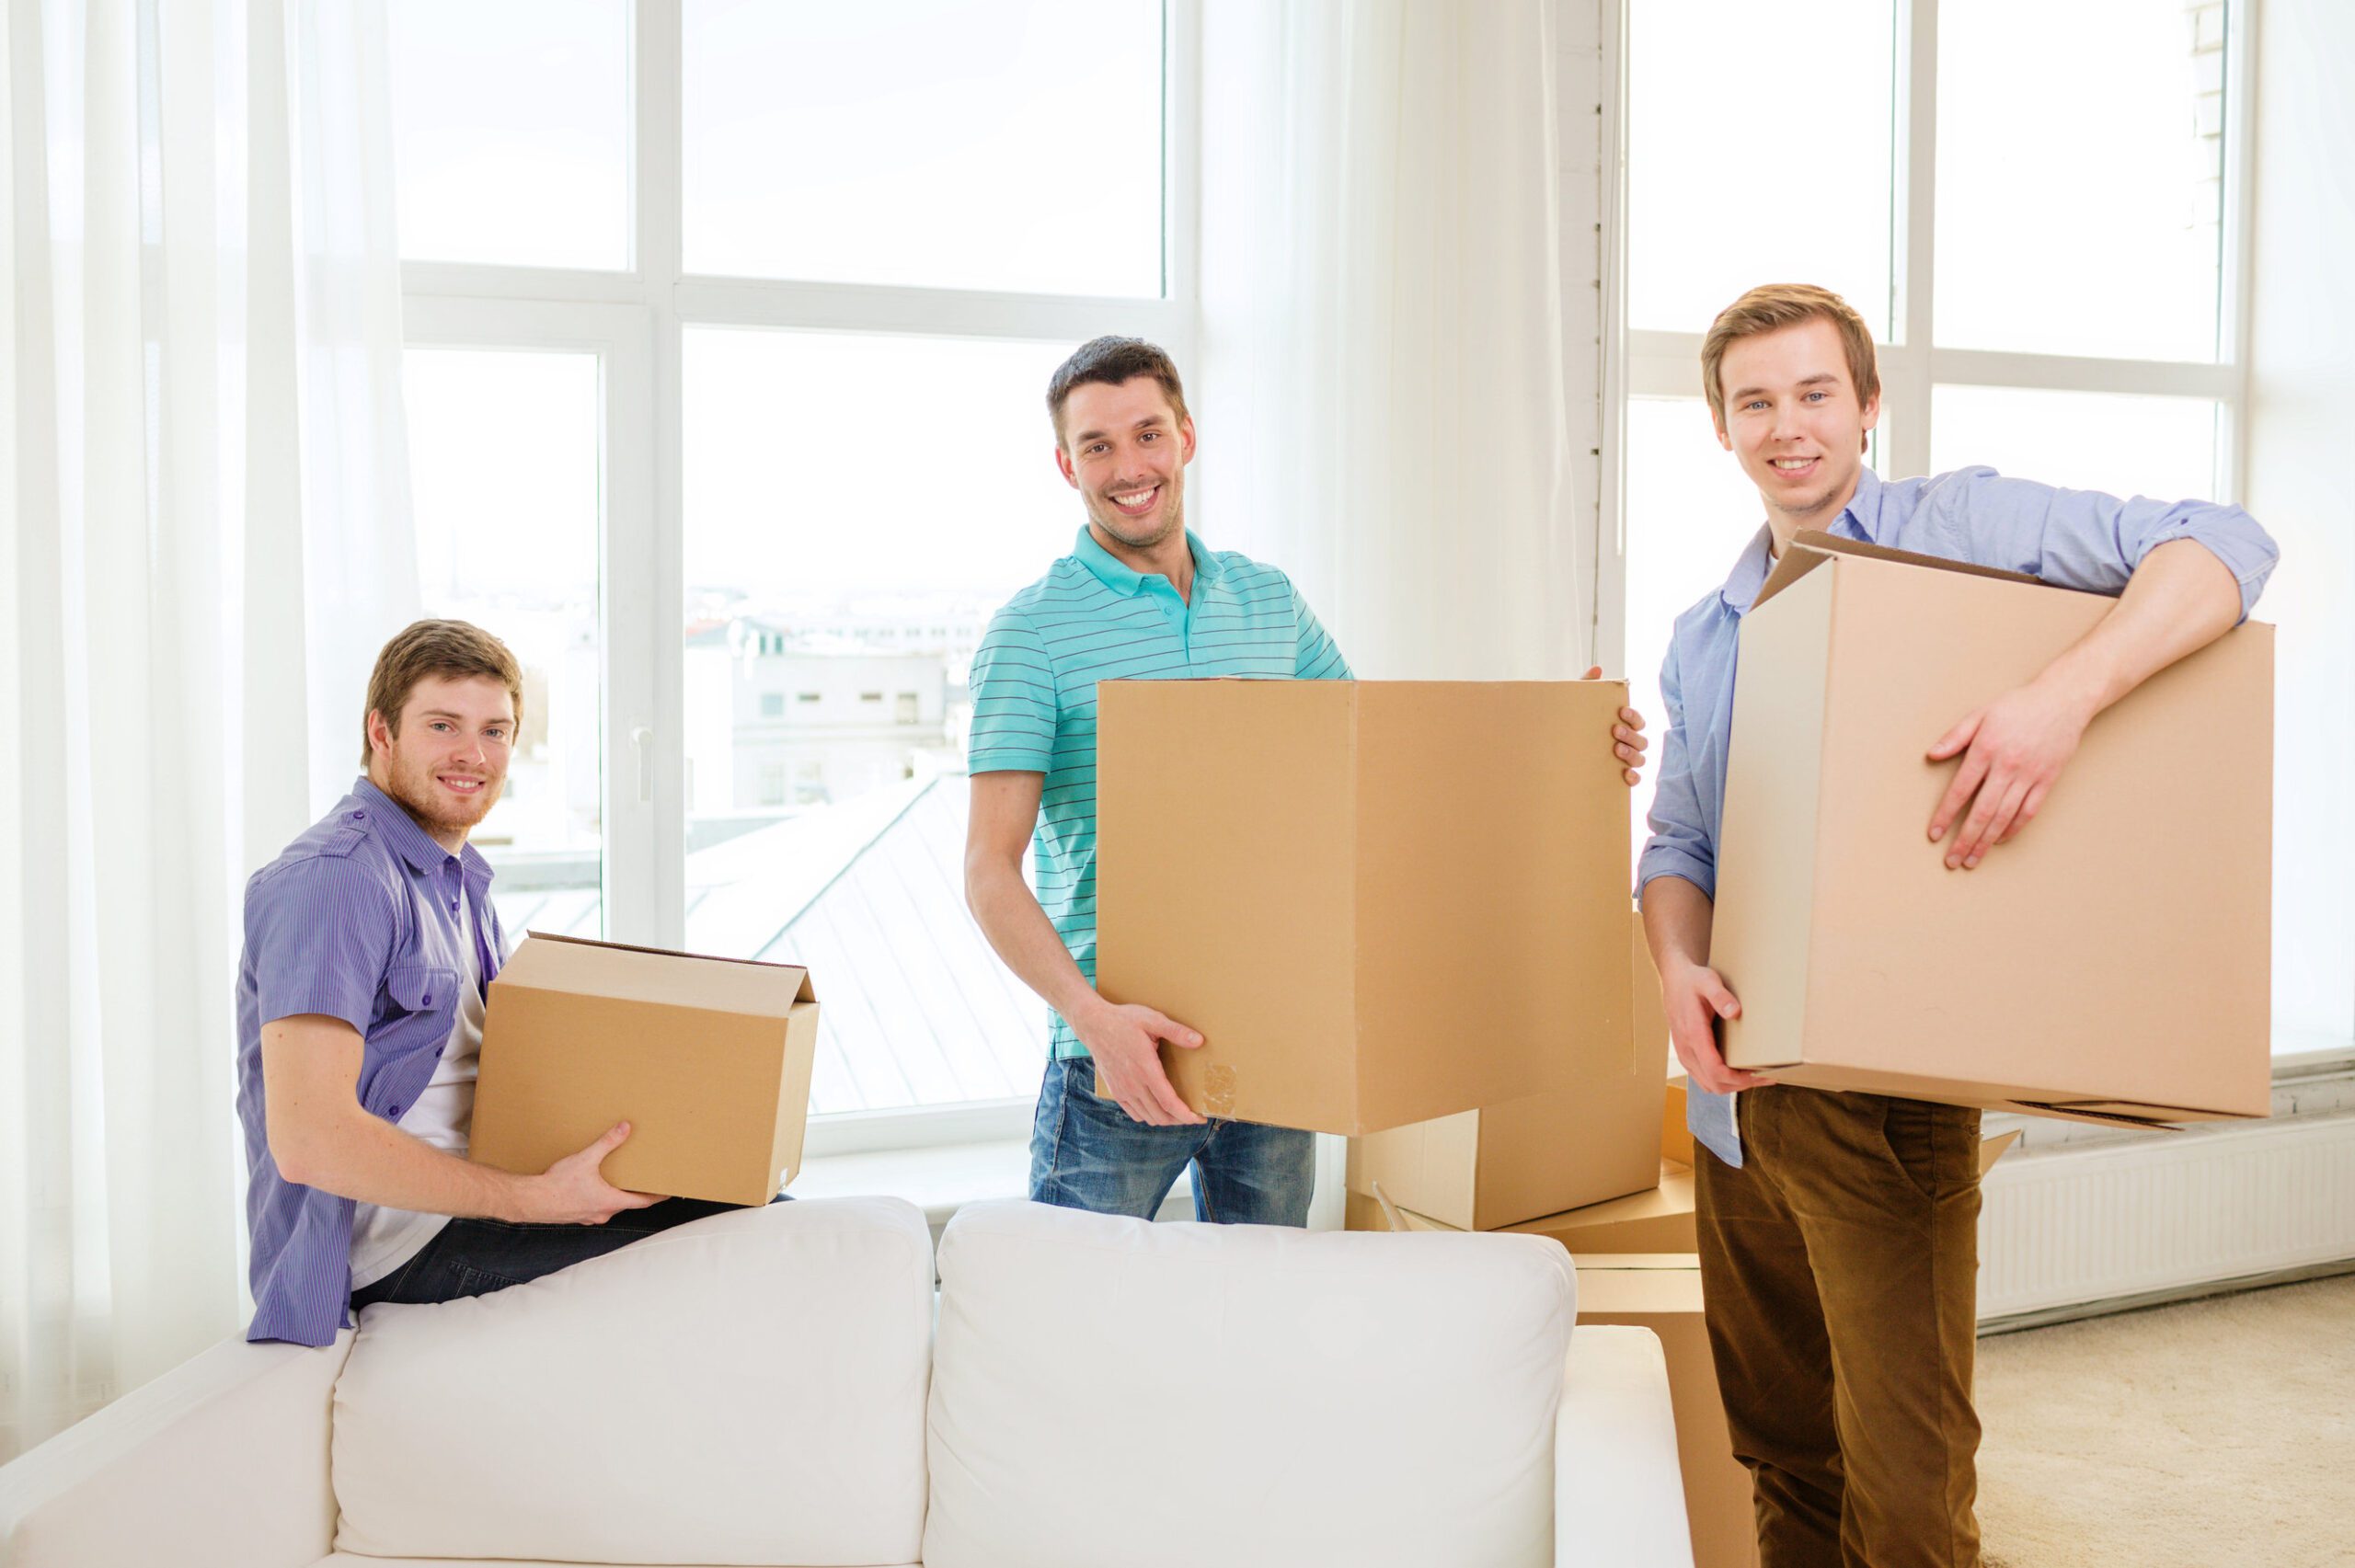 moving, real estate and friendship concept - smiling male friends carrying boxes at new place